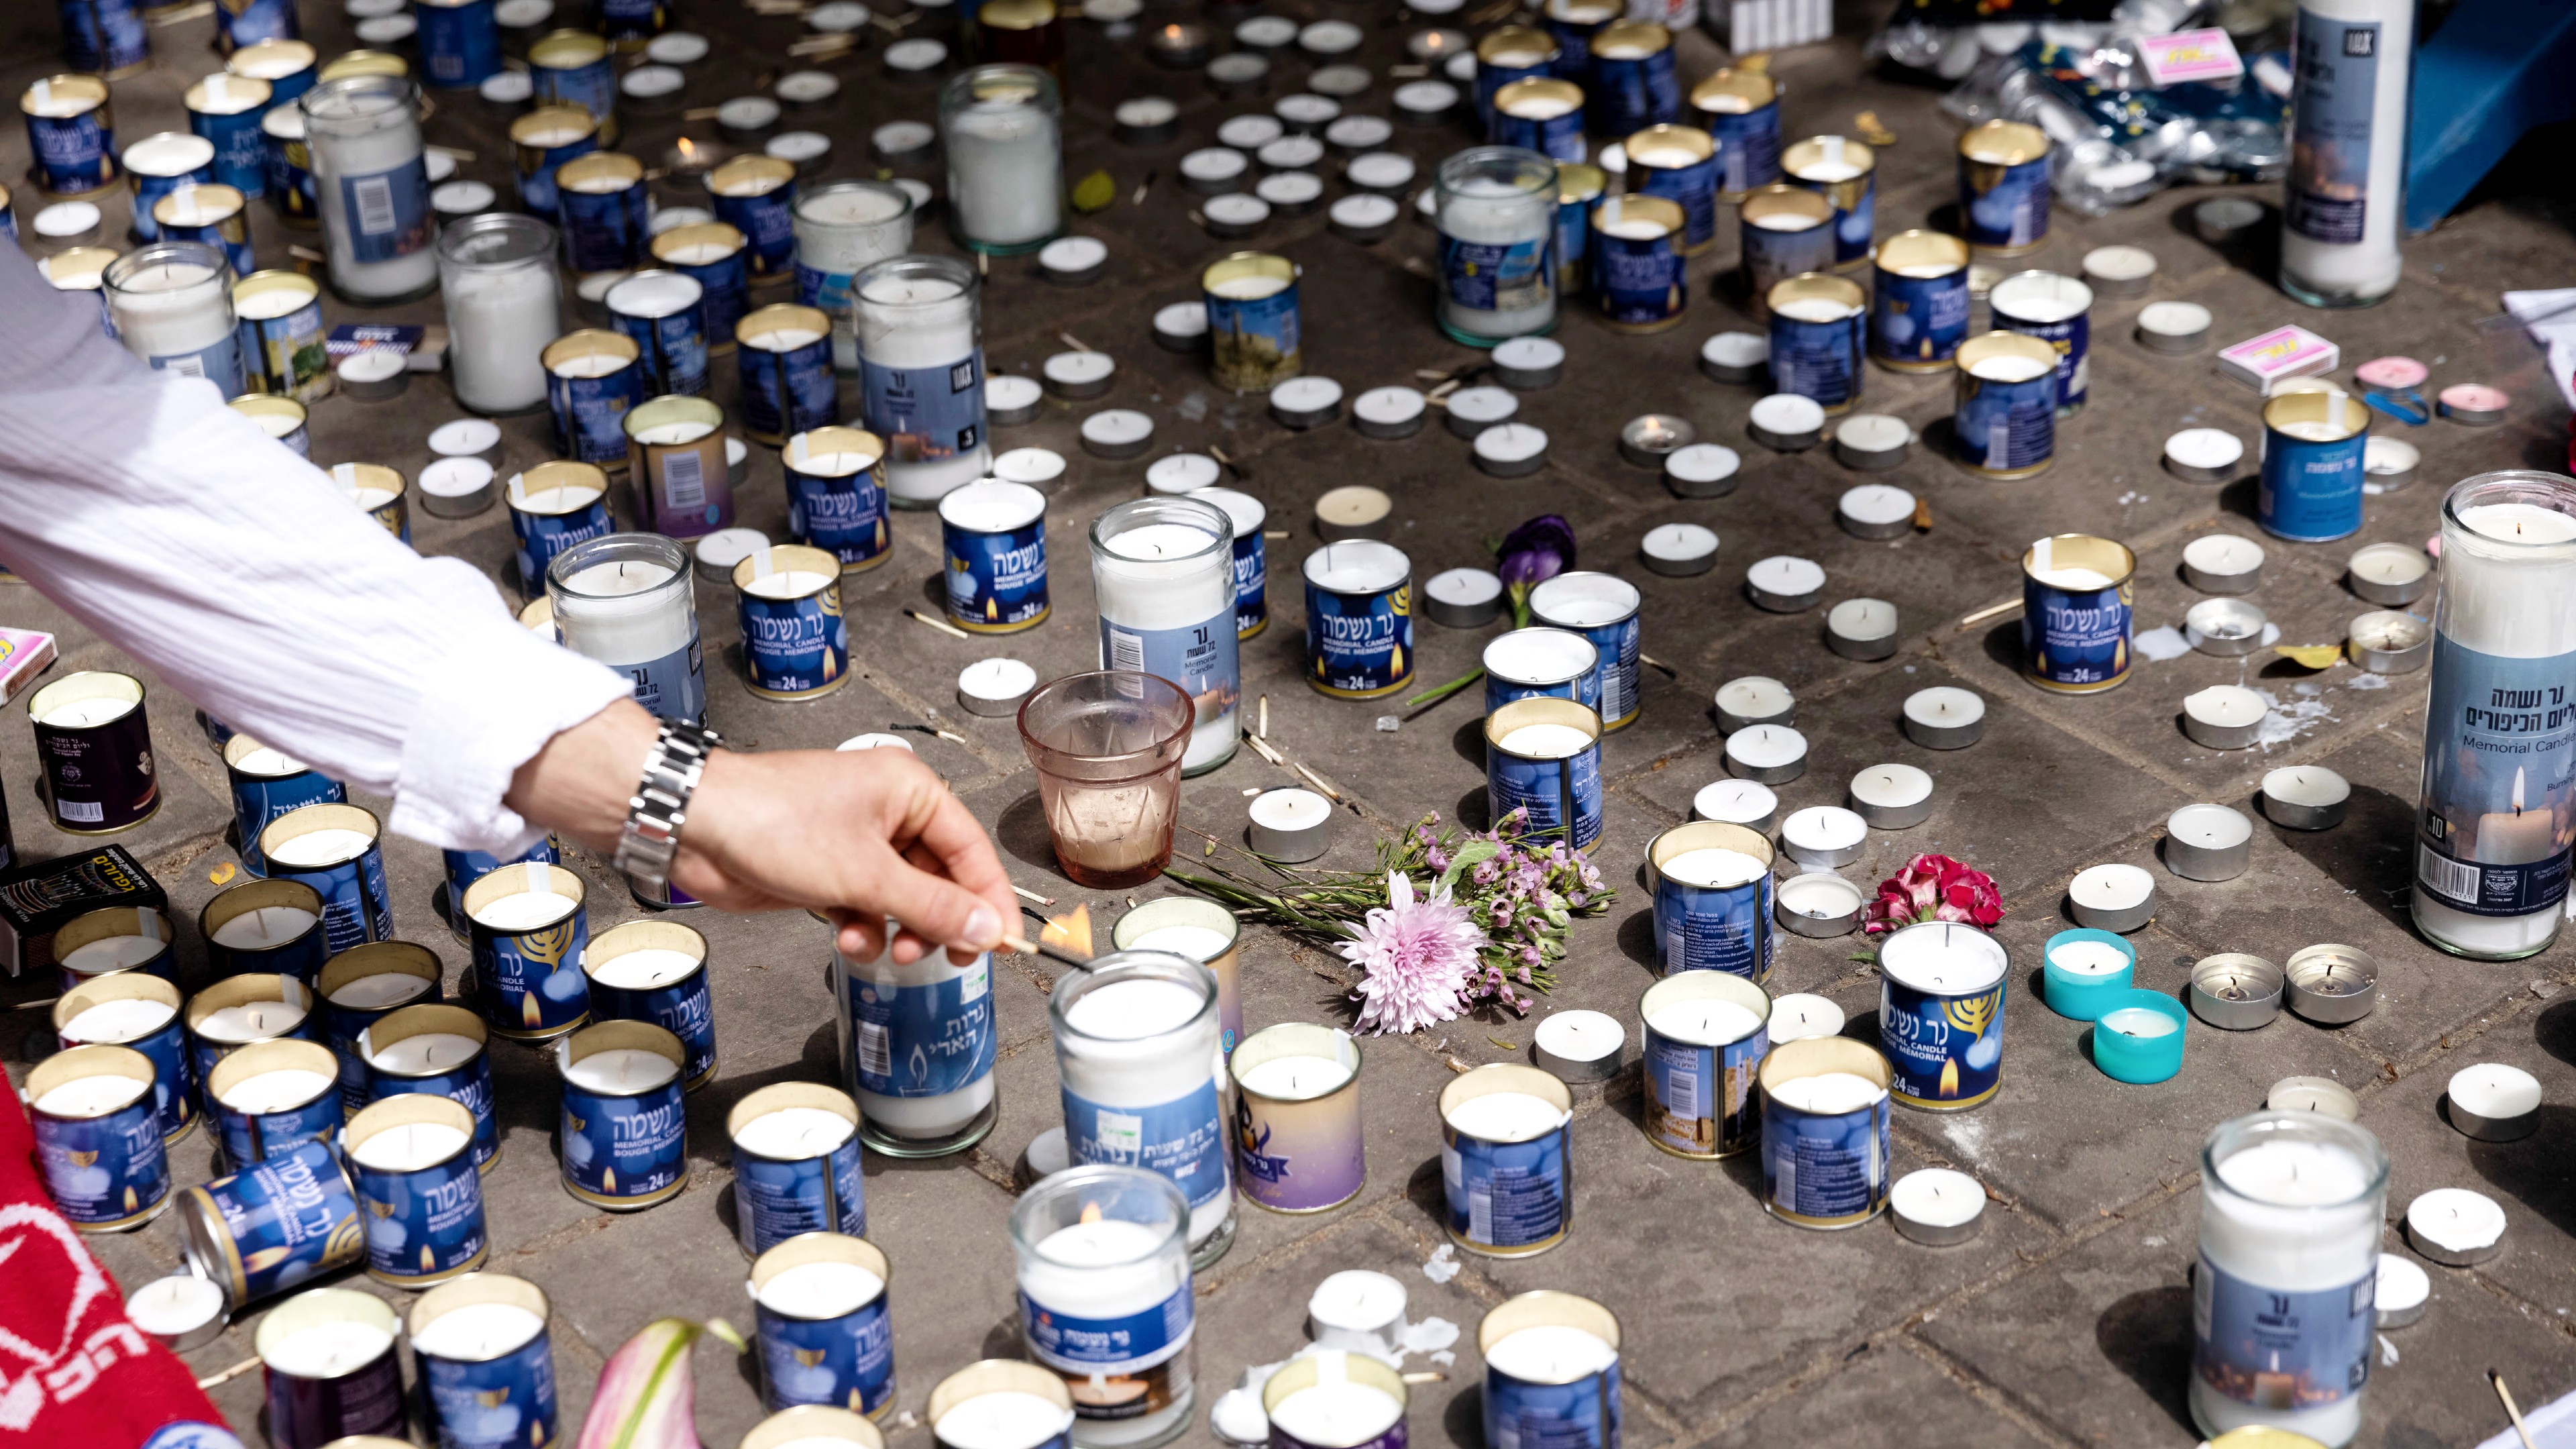 Israelis light candles to remember the victims of the shooting in Dizengoff Street in central Tel Aviv. (MEE/Oren Ziv)